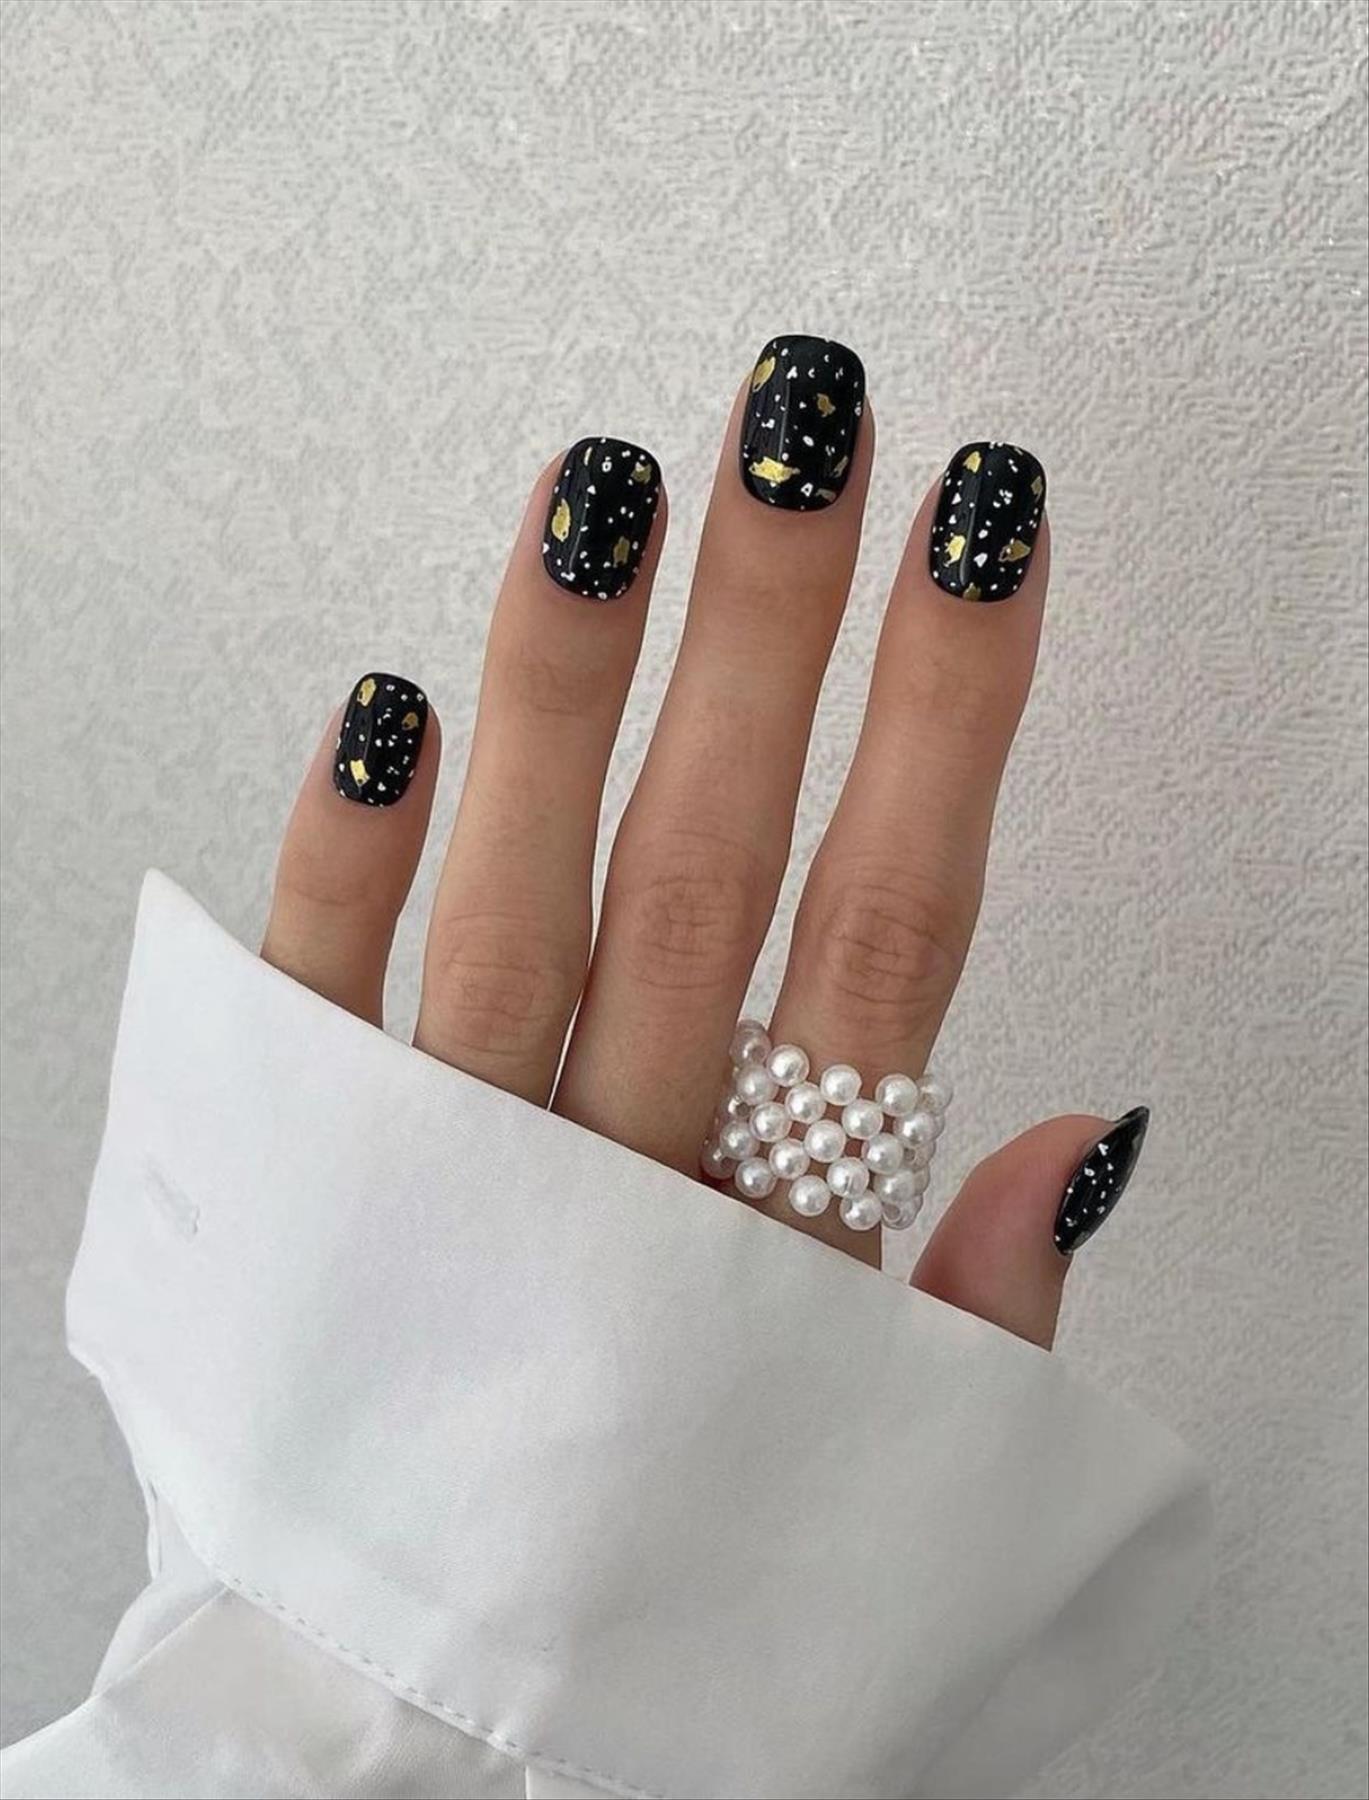 r Nail Inspiration: The Best Short Square Nails for 2023